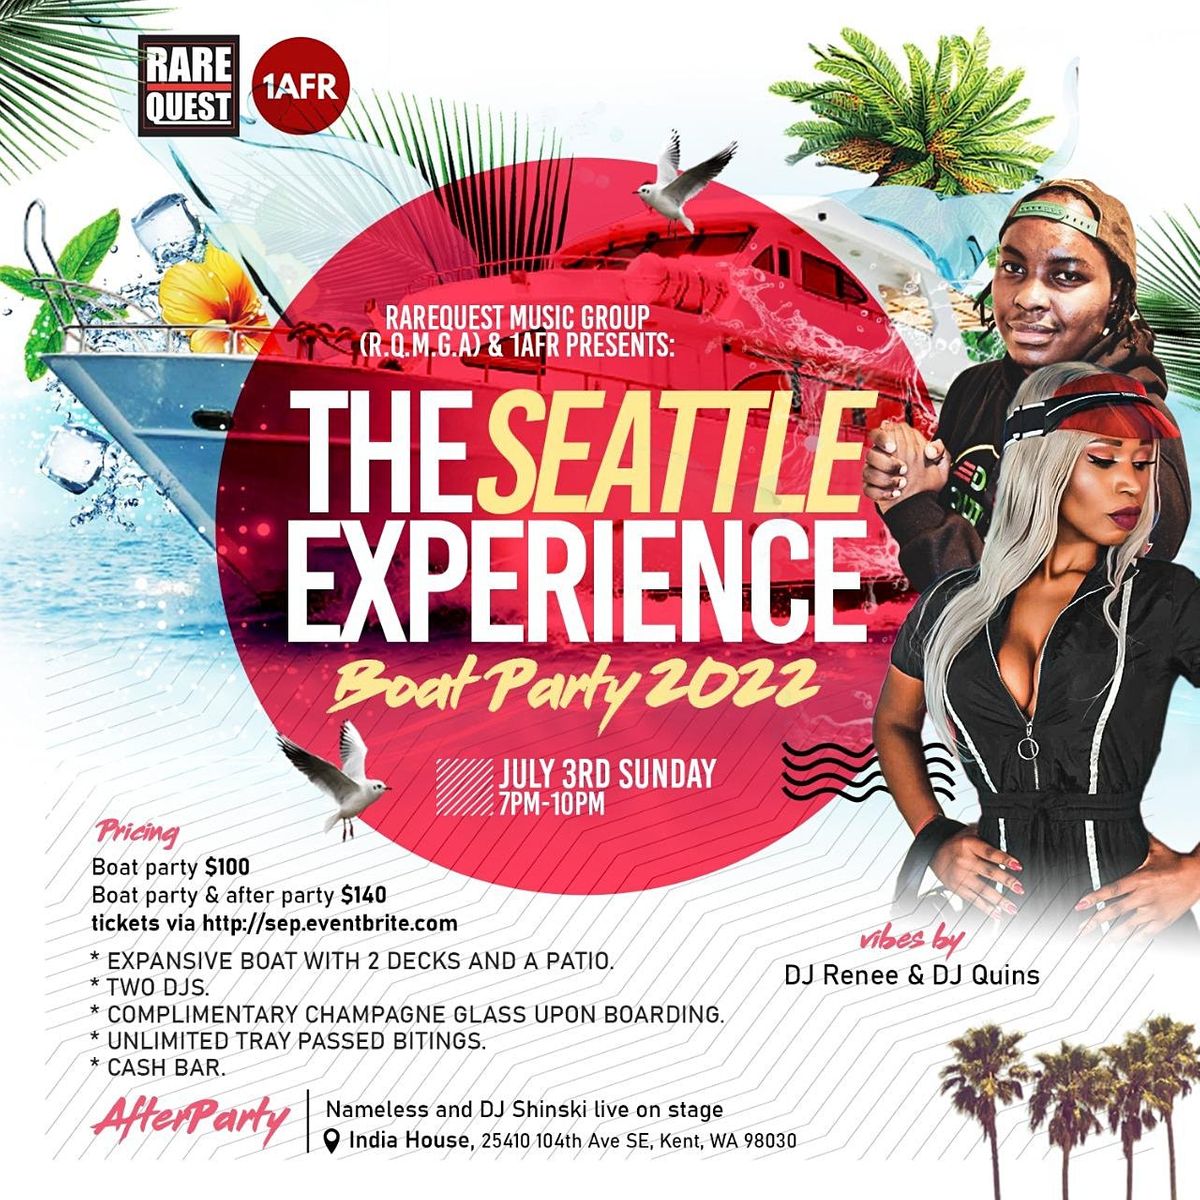 The Seattle Experience | Boat Party 2022 | Summer Sunset Edition